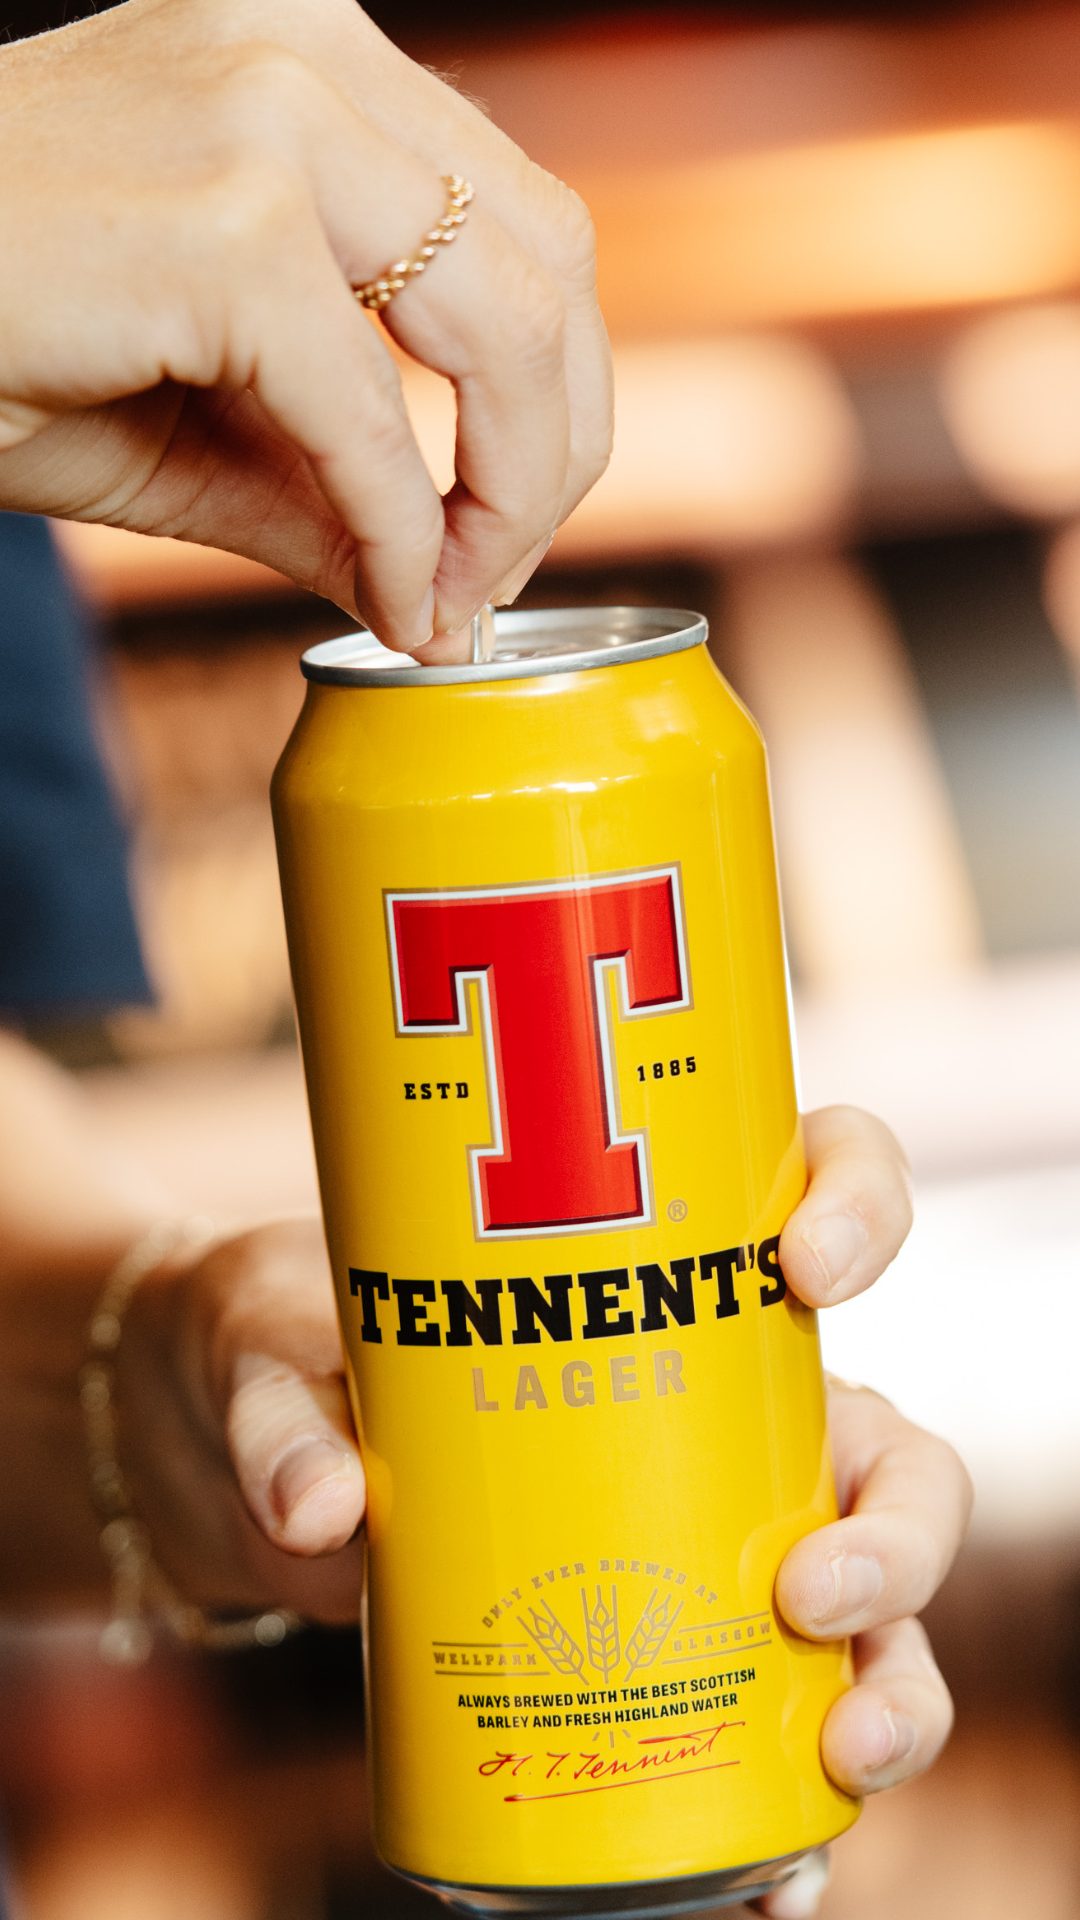 Buy Tennent's Lager Cans - Tennent's Shop